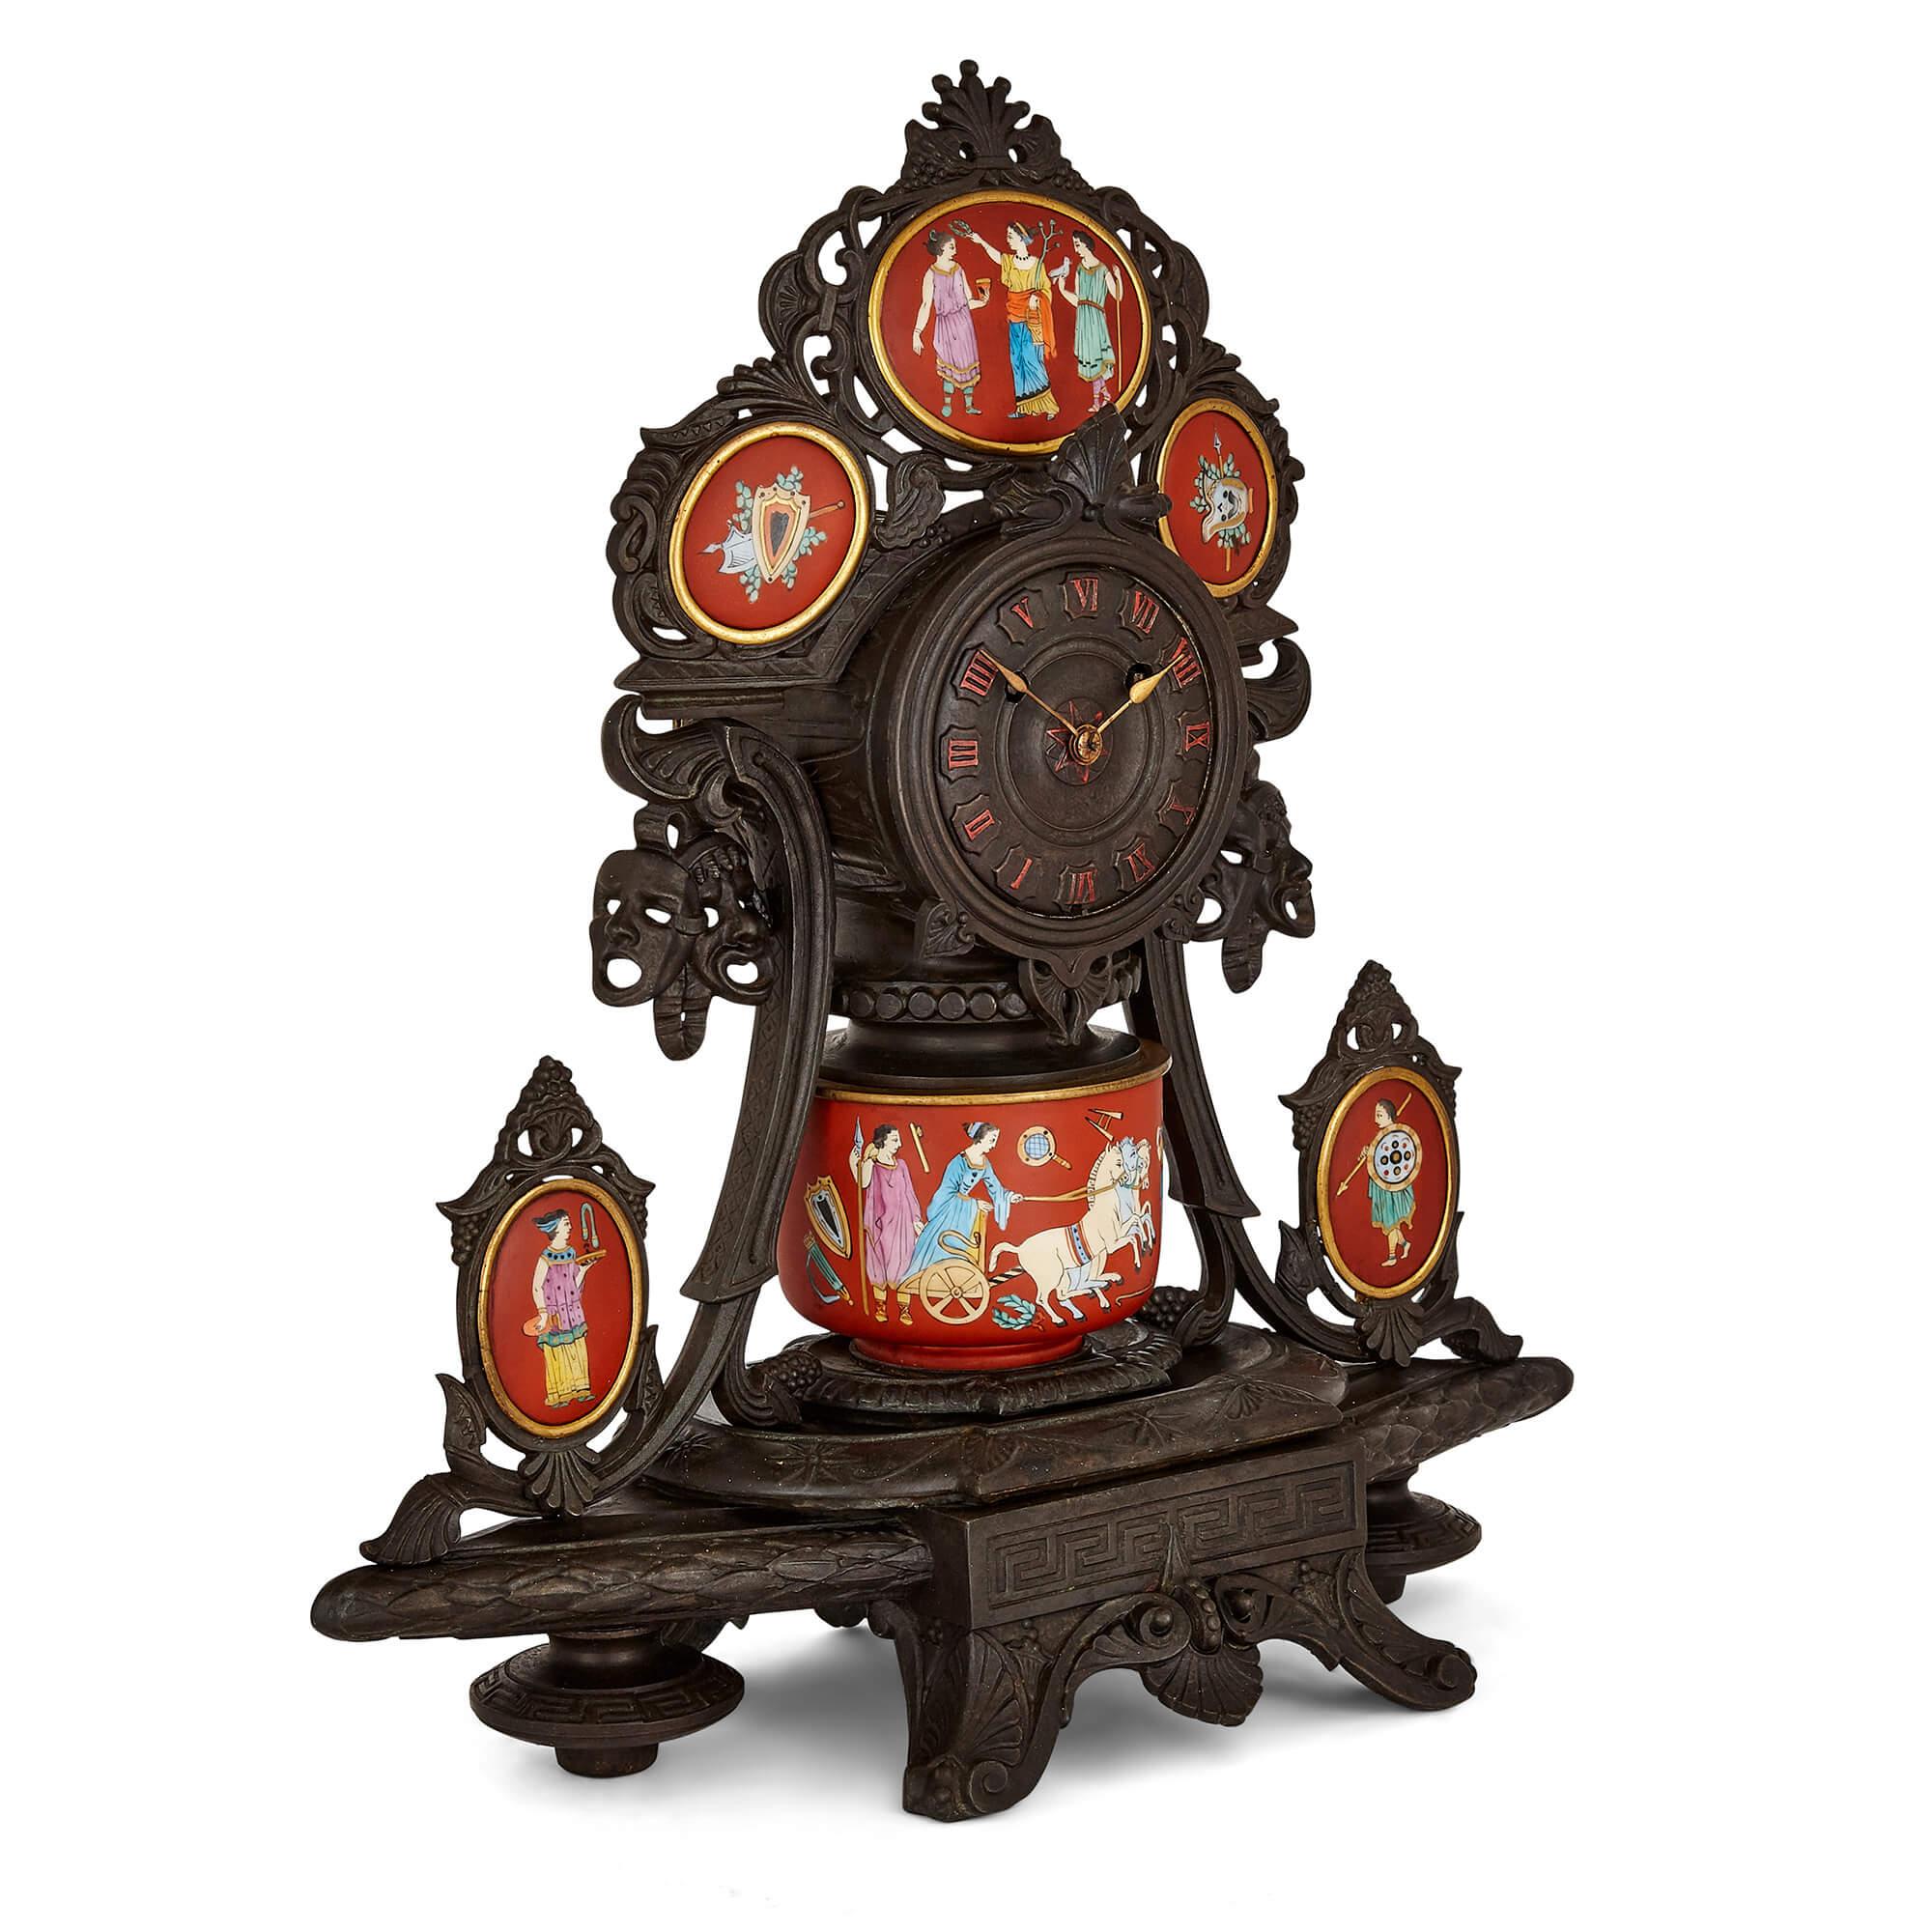 Antique Neo-Grec porcelain and cast iron clock set
French, 19th Century
Clock: Height 41cm, width 40cm, depth 16cm
Candelabra: Height 30cm, width 20cm, depth 13cm

This beautiful Neo-Grec style clock set is crafted from cast iron and red